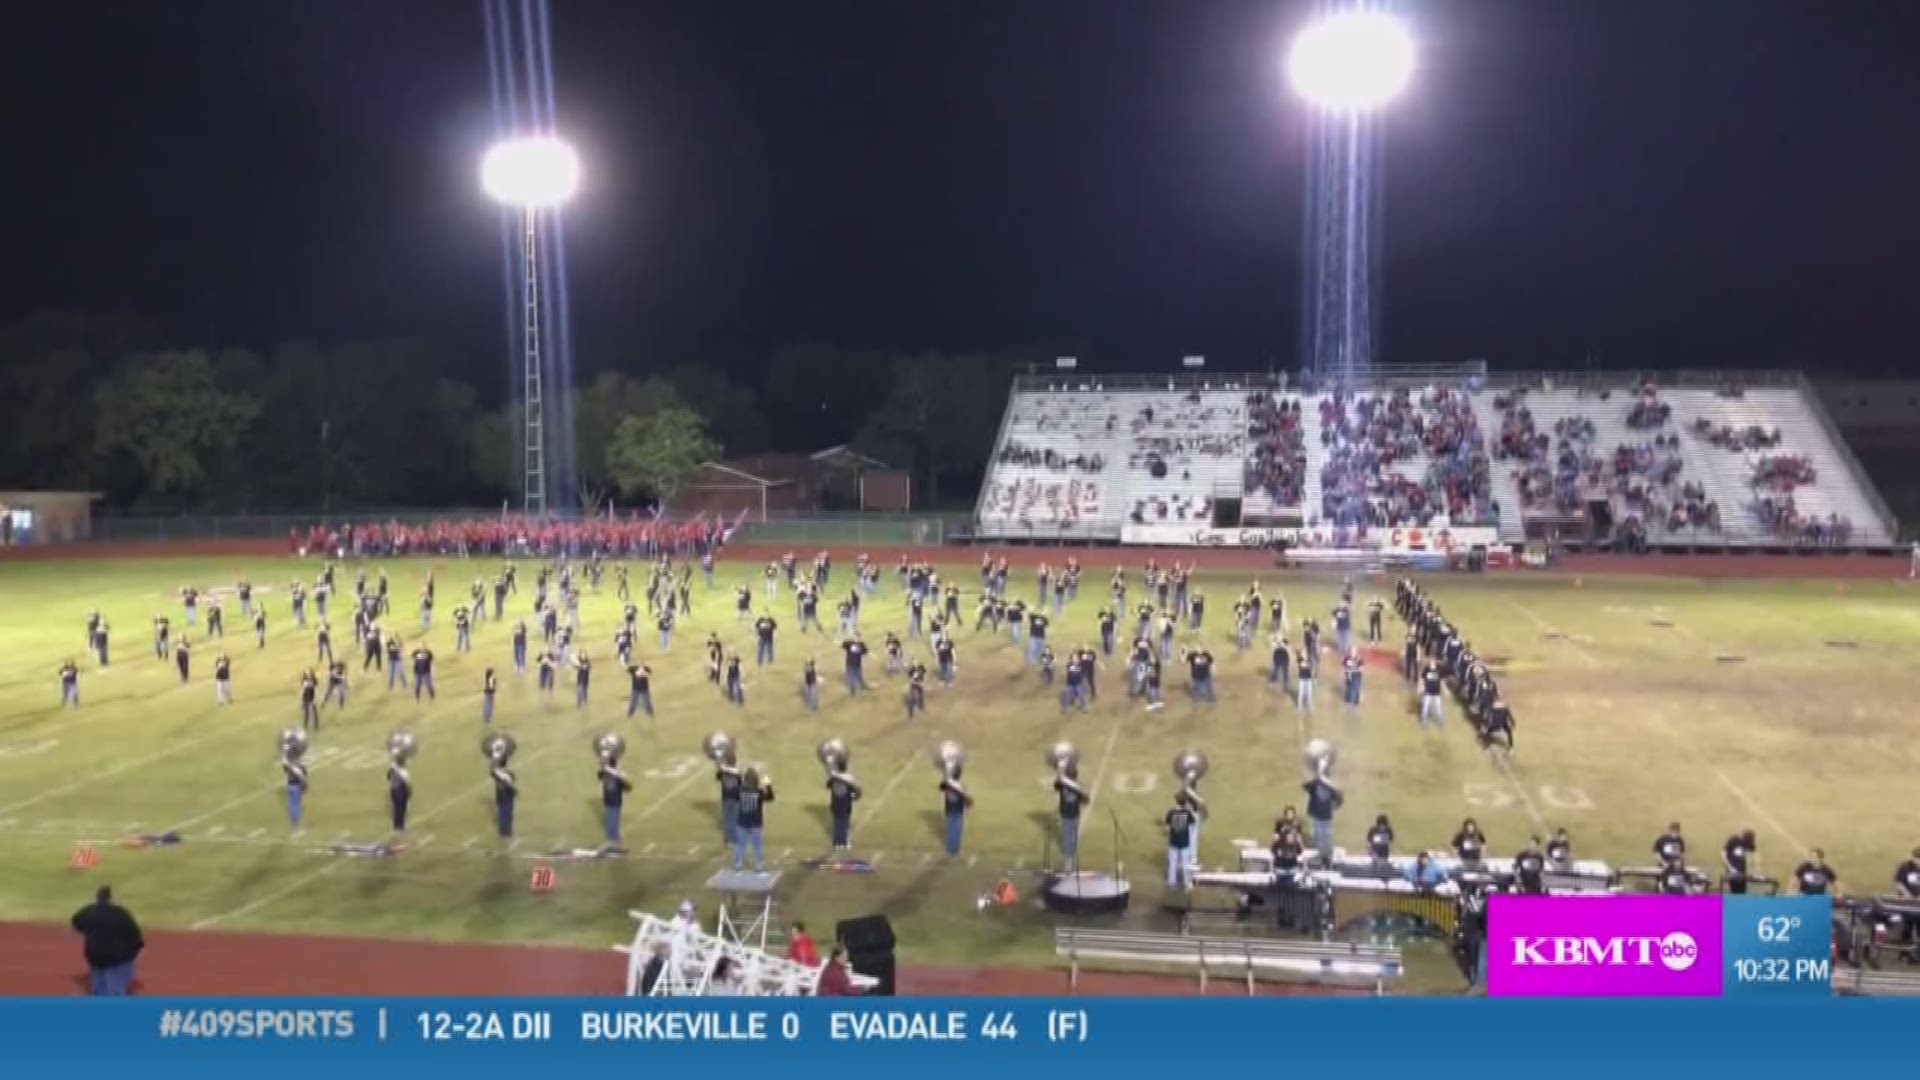 The Lumberton High School Mighty Raider Band is the 409Sports Band of the Week for week nine